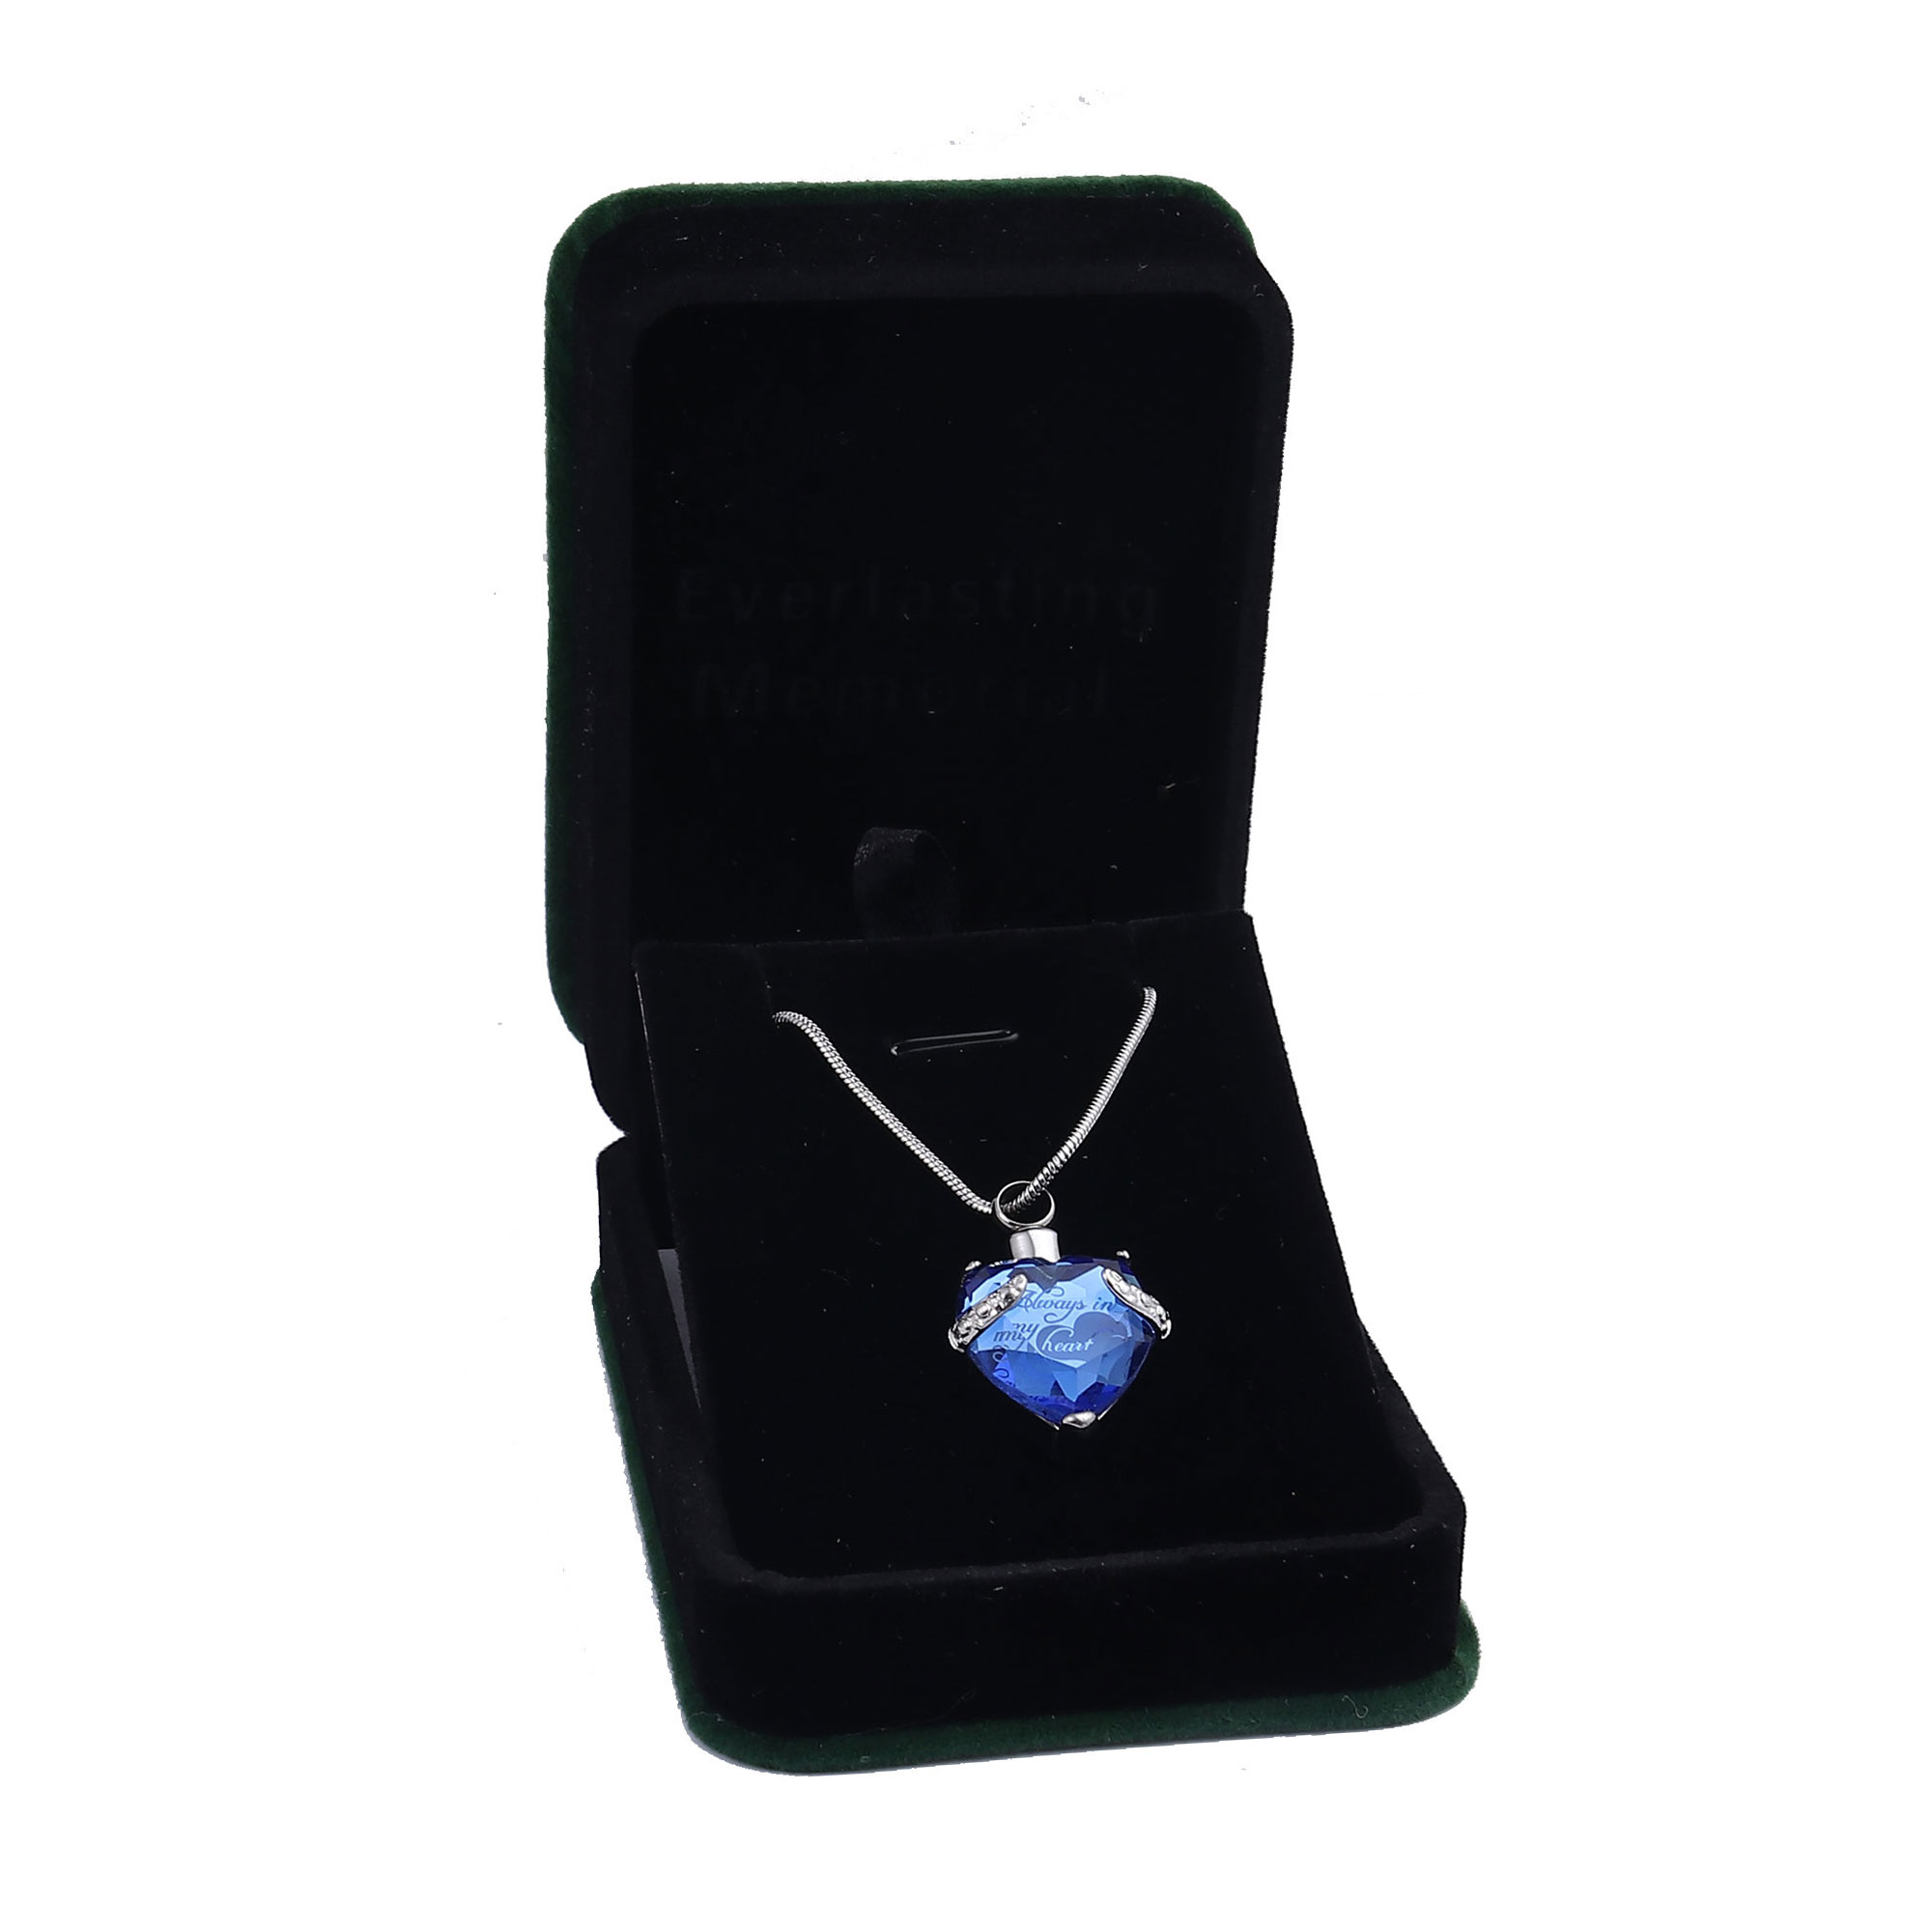 Blue "Always in My Heart" Cremation Necklace Rhinsestone Women's Heart Urn Necklace for Ashes Funeral Urn Jewelry Remembrance Memorial Pendant with Free Funnel Fill Kit and Gift Box - image 2 of 10